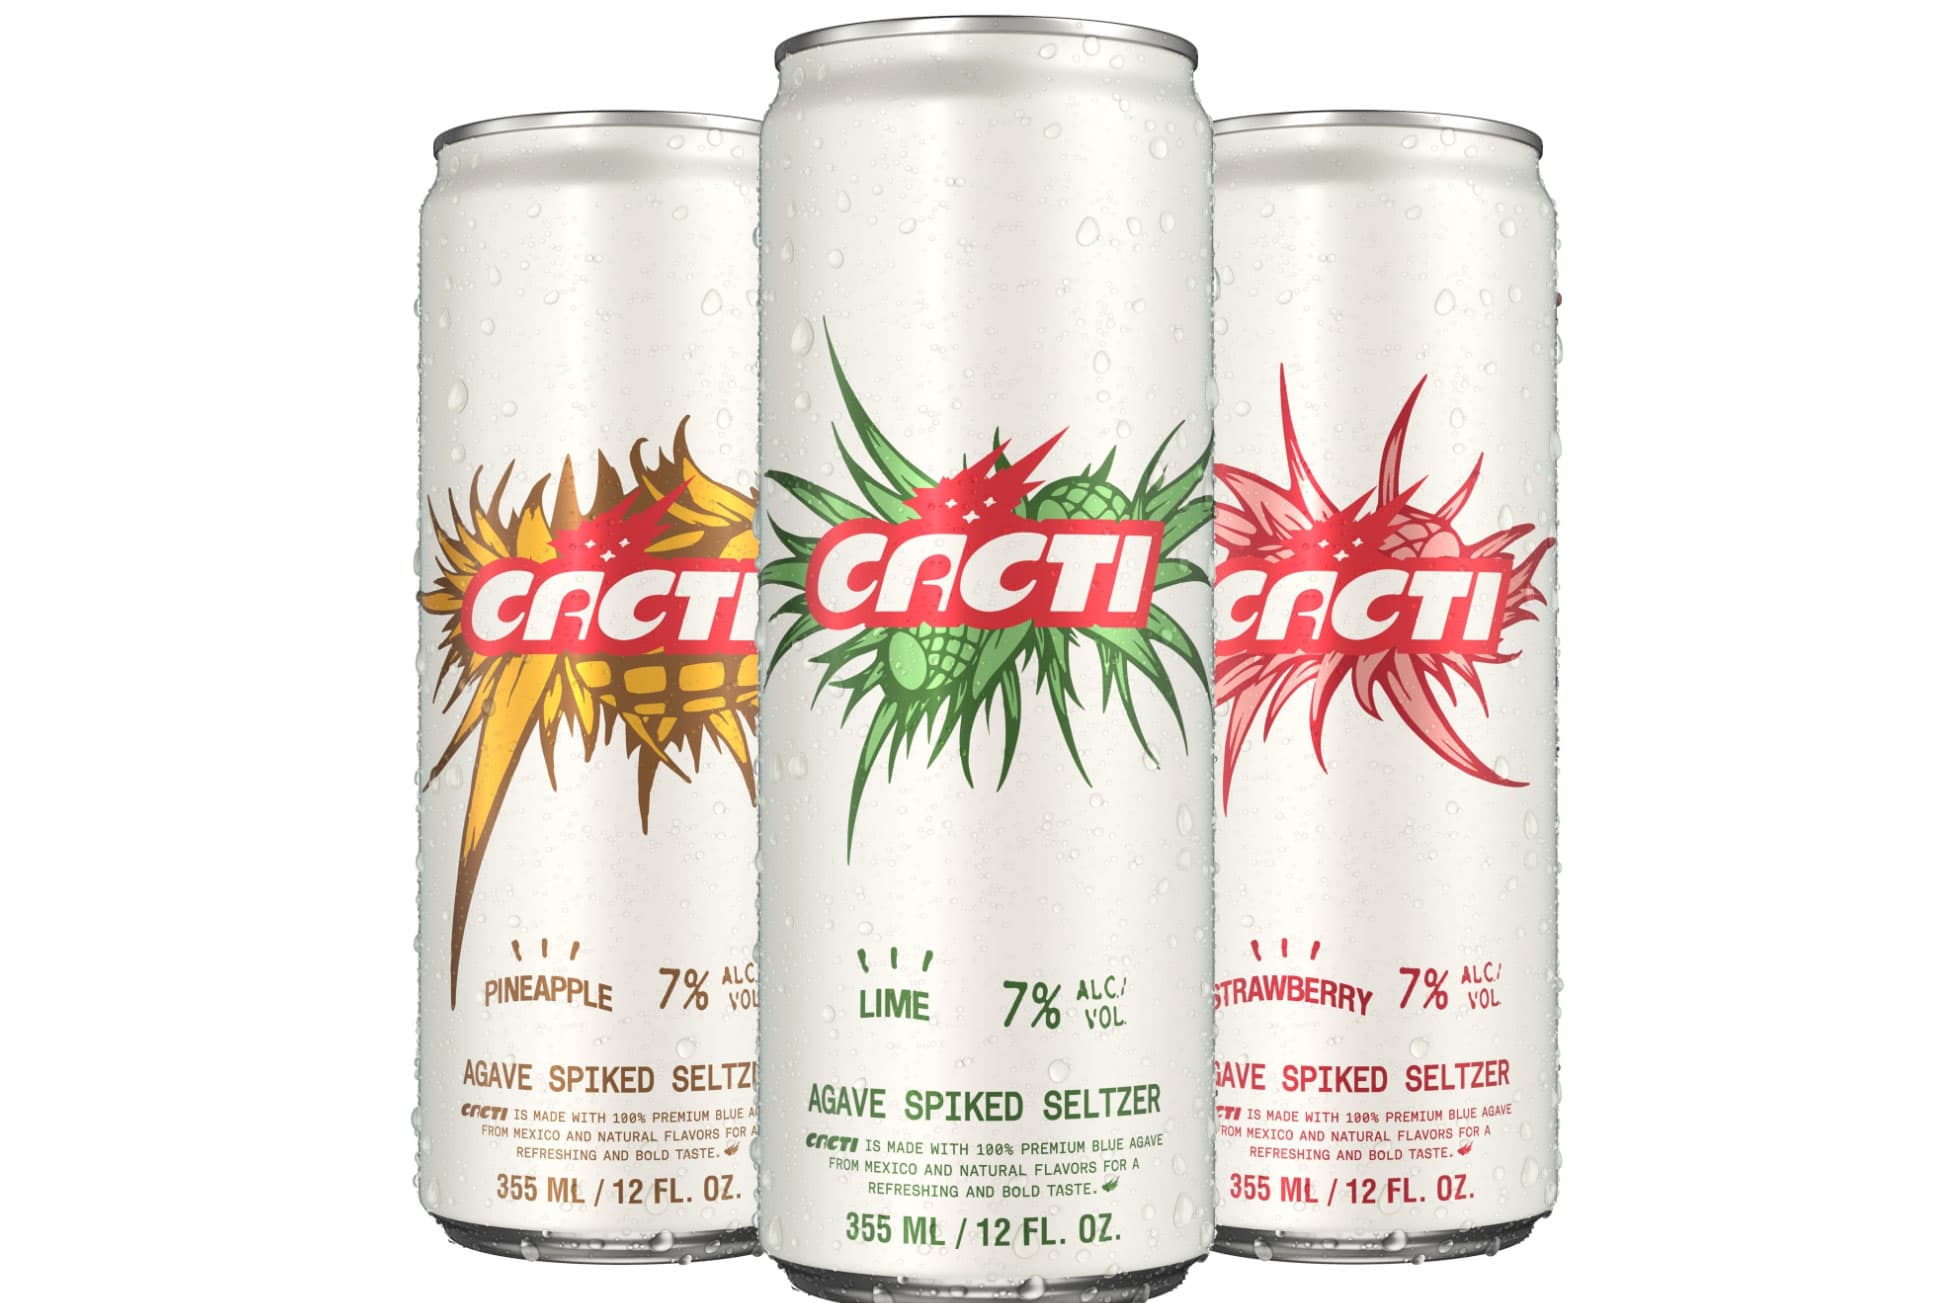 CEO Anheuser-Busch for the success of the tough Cacti seltzer supported by Travis Scott